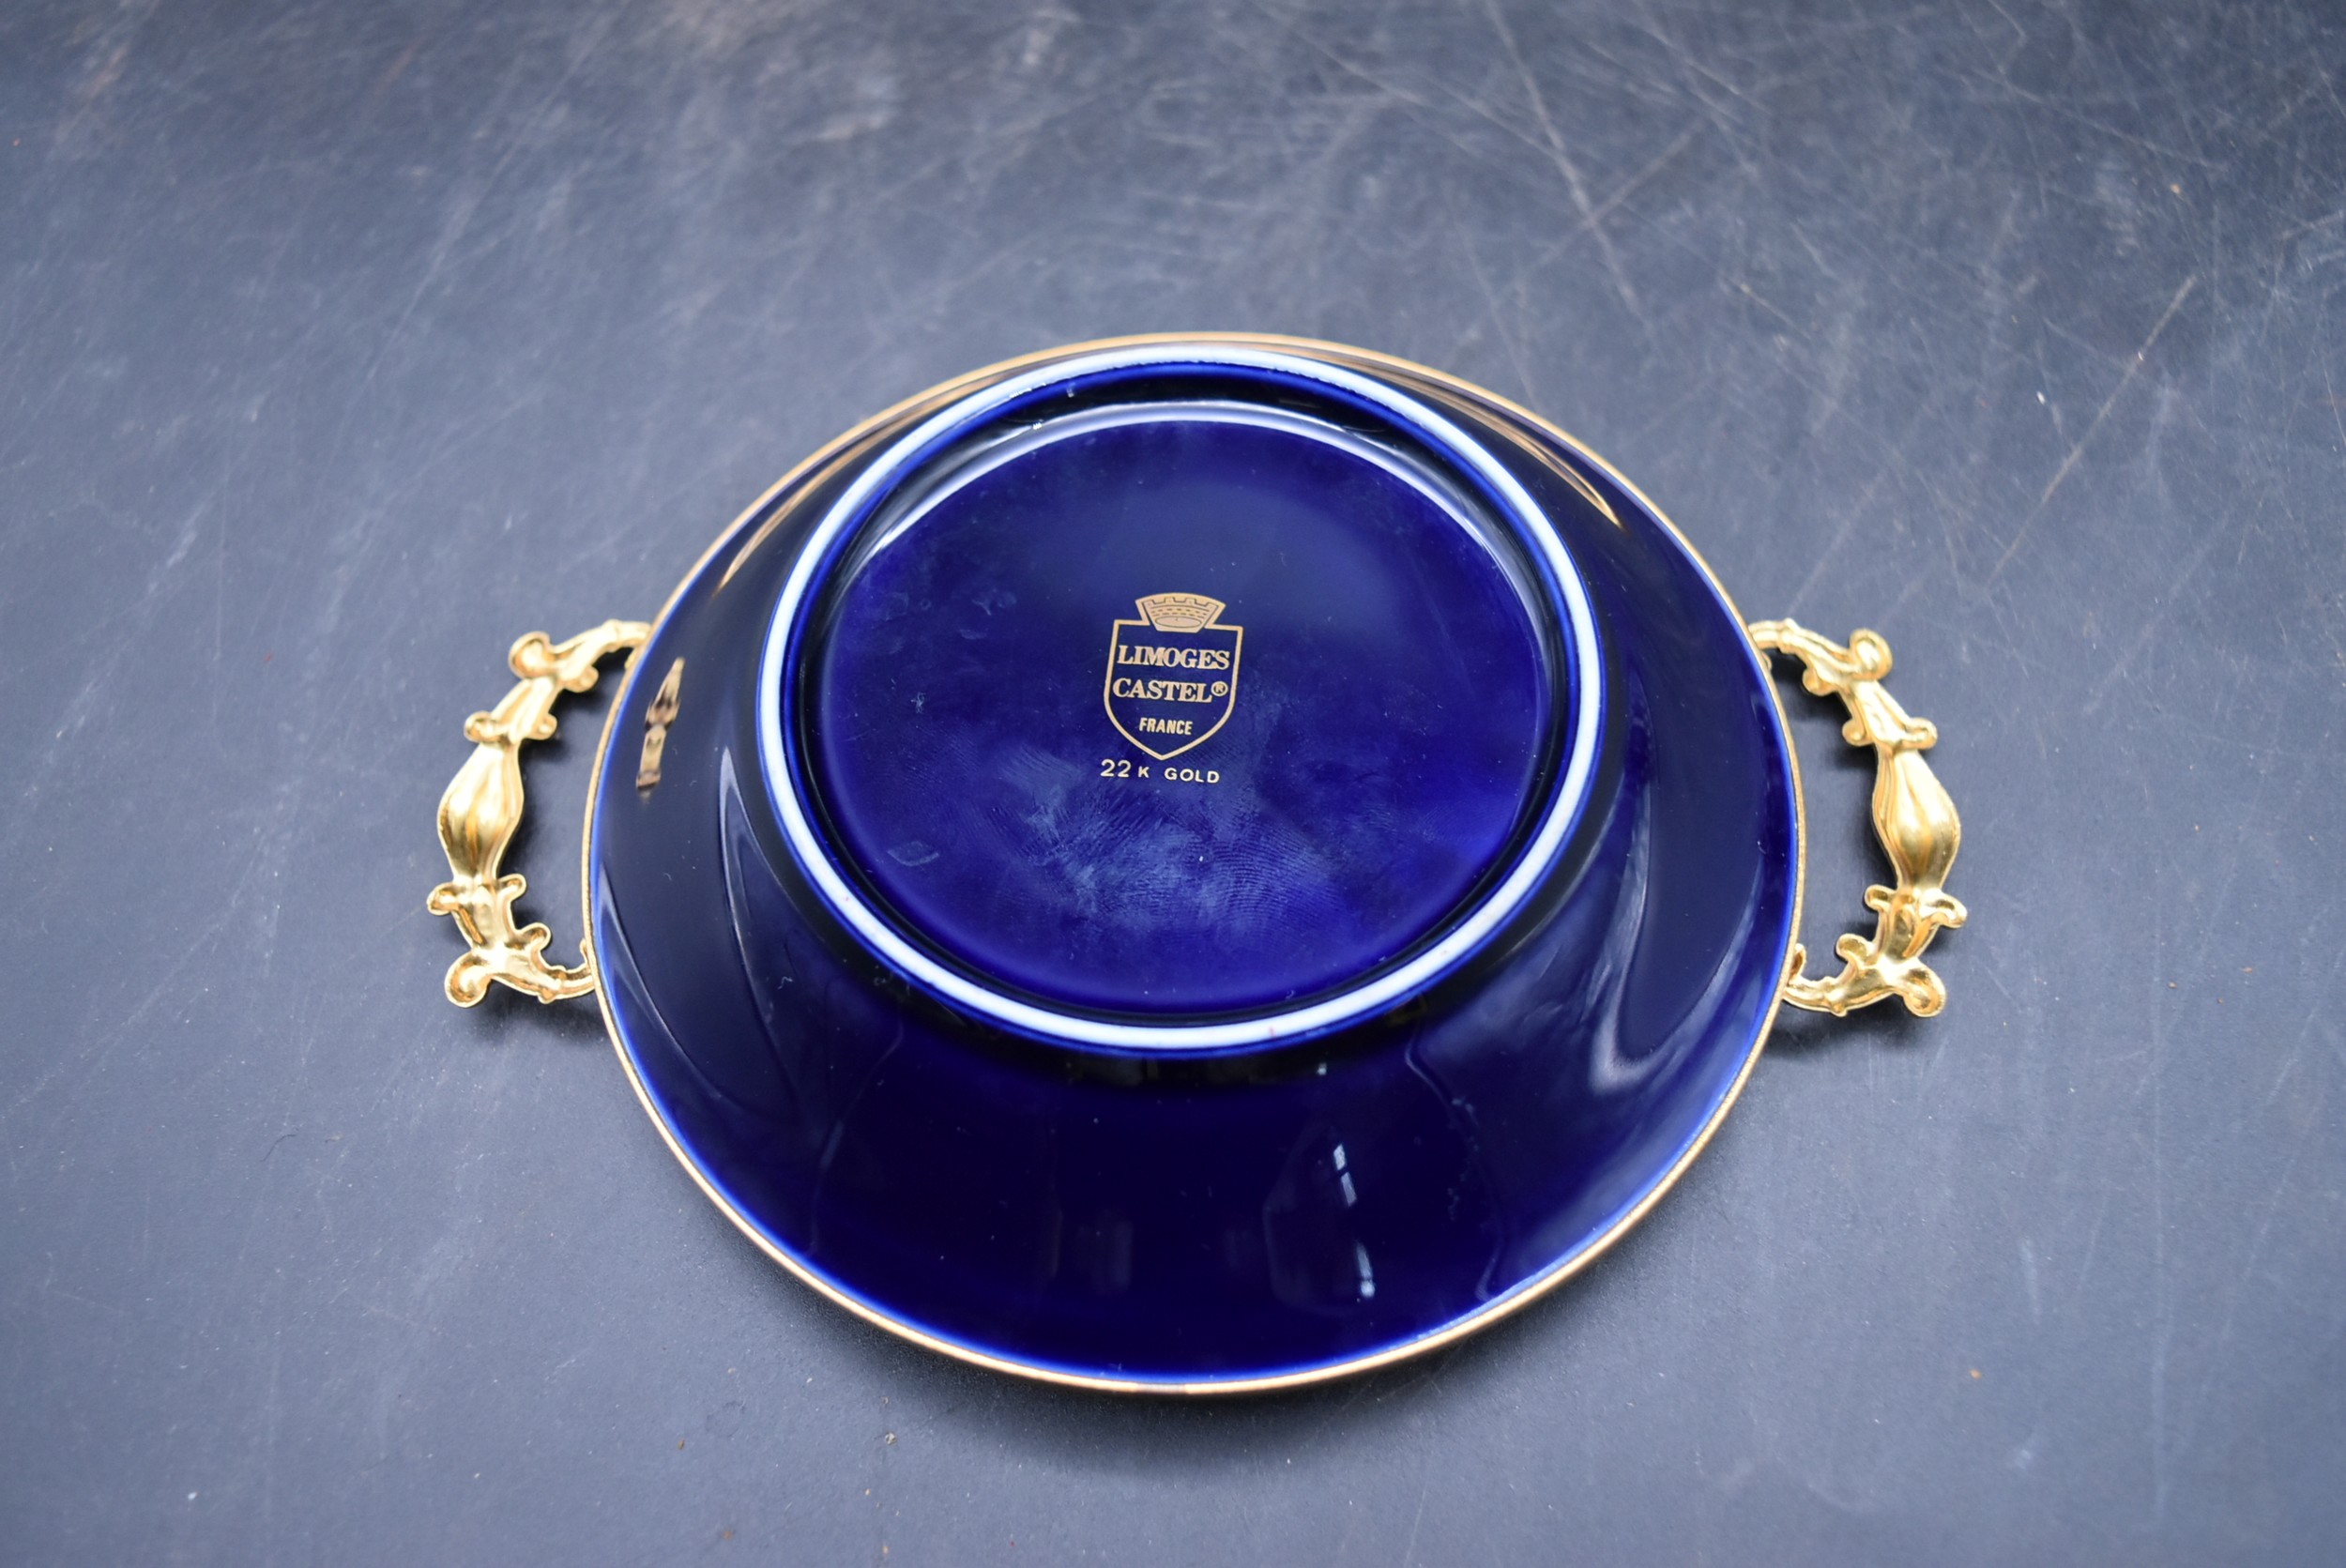 A Limoges gold plated twin handled bowl marked Limoges Kastel 22k gold along with a flower encrusted - Image 4 of 10